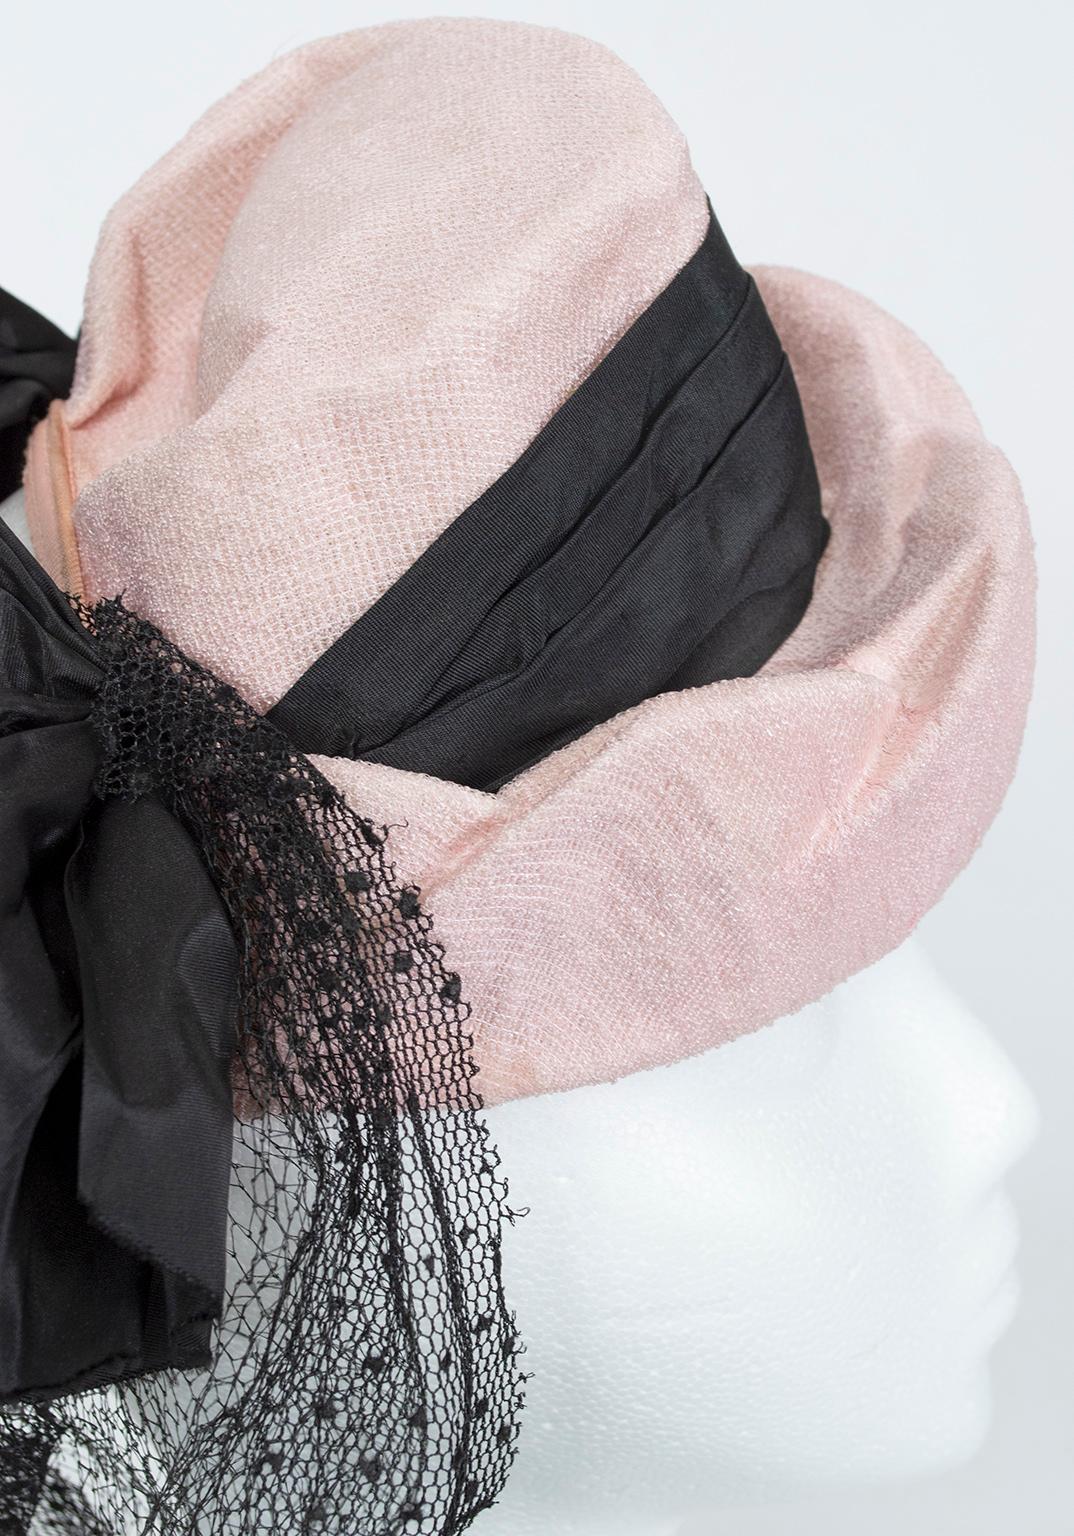 Women's Light Pink Miniature Tilted Top Hat with Trailing Black Veil – O/S, 1930s